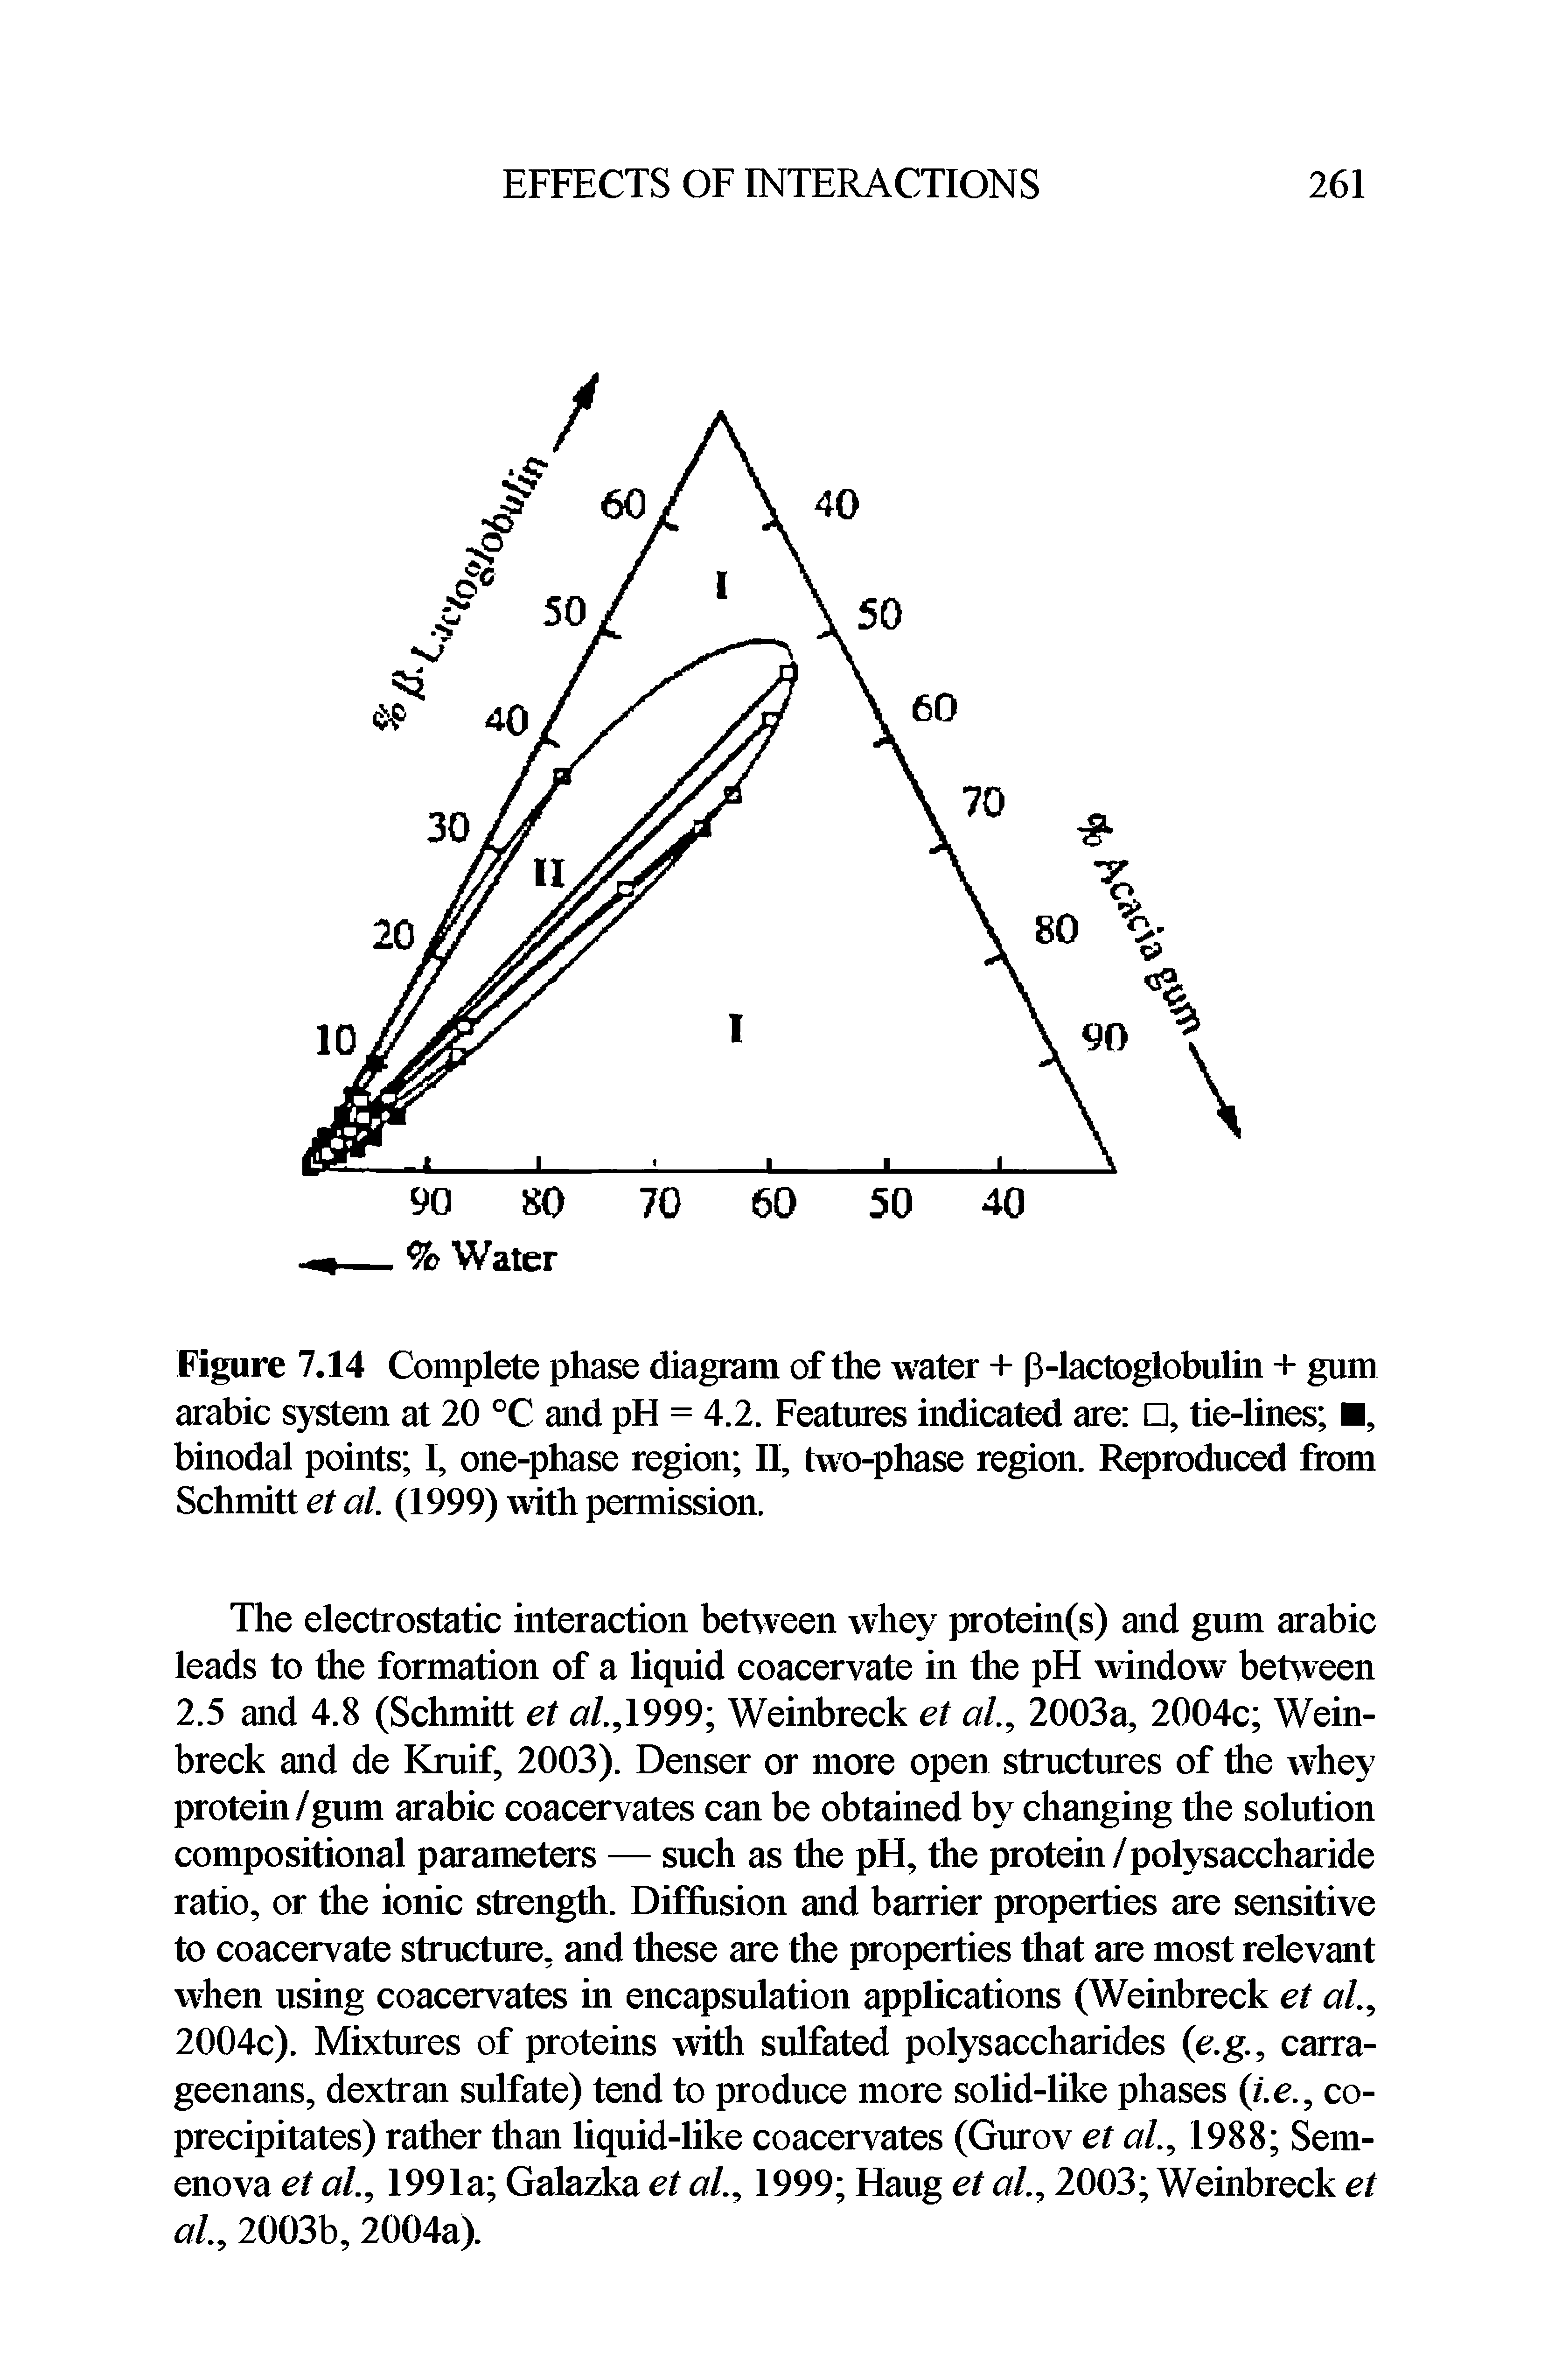 Figure 7.14 Complete phase diagram of the water + p-lactoglobulin + gum arabic system at 20 °C and pH = 4.2. Features indicated are , tie-lines , binodal points I, one-phase region II, two-phase region. Reproduced from Schmitt et al. (1999) with permission.